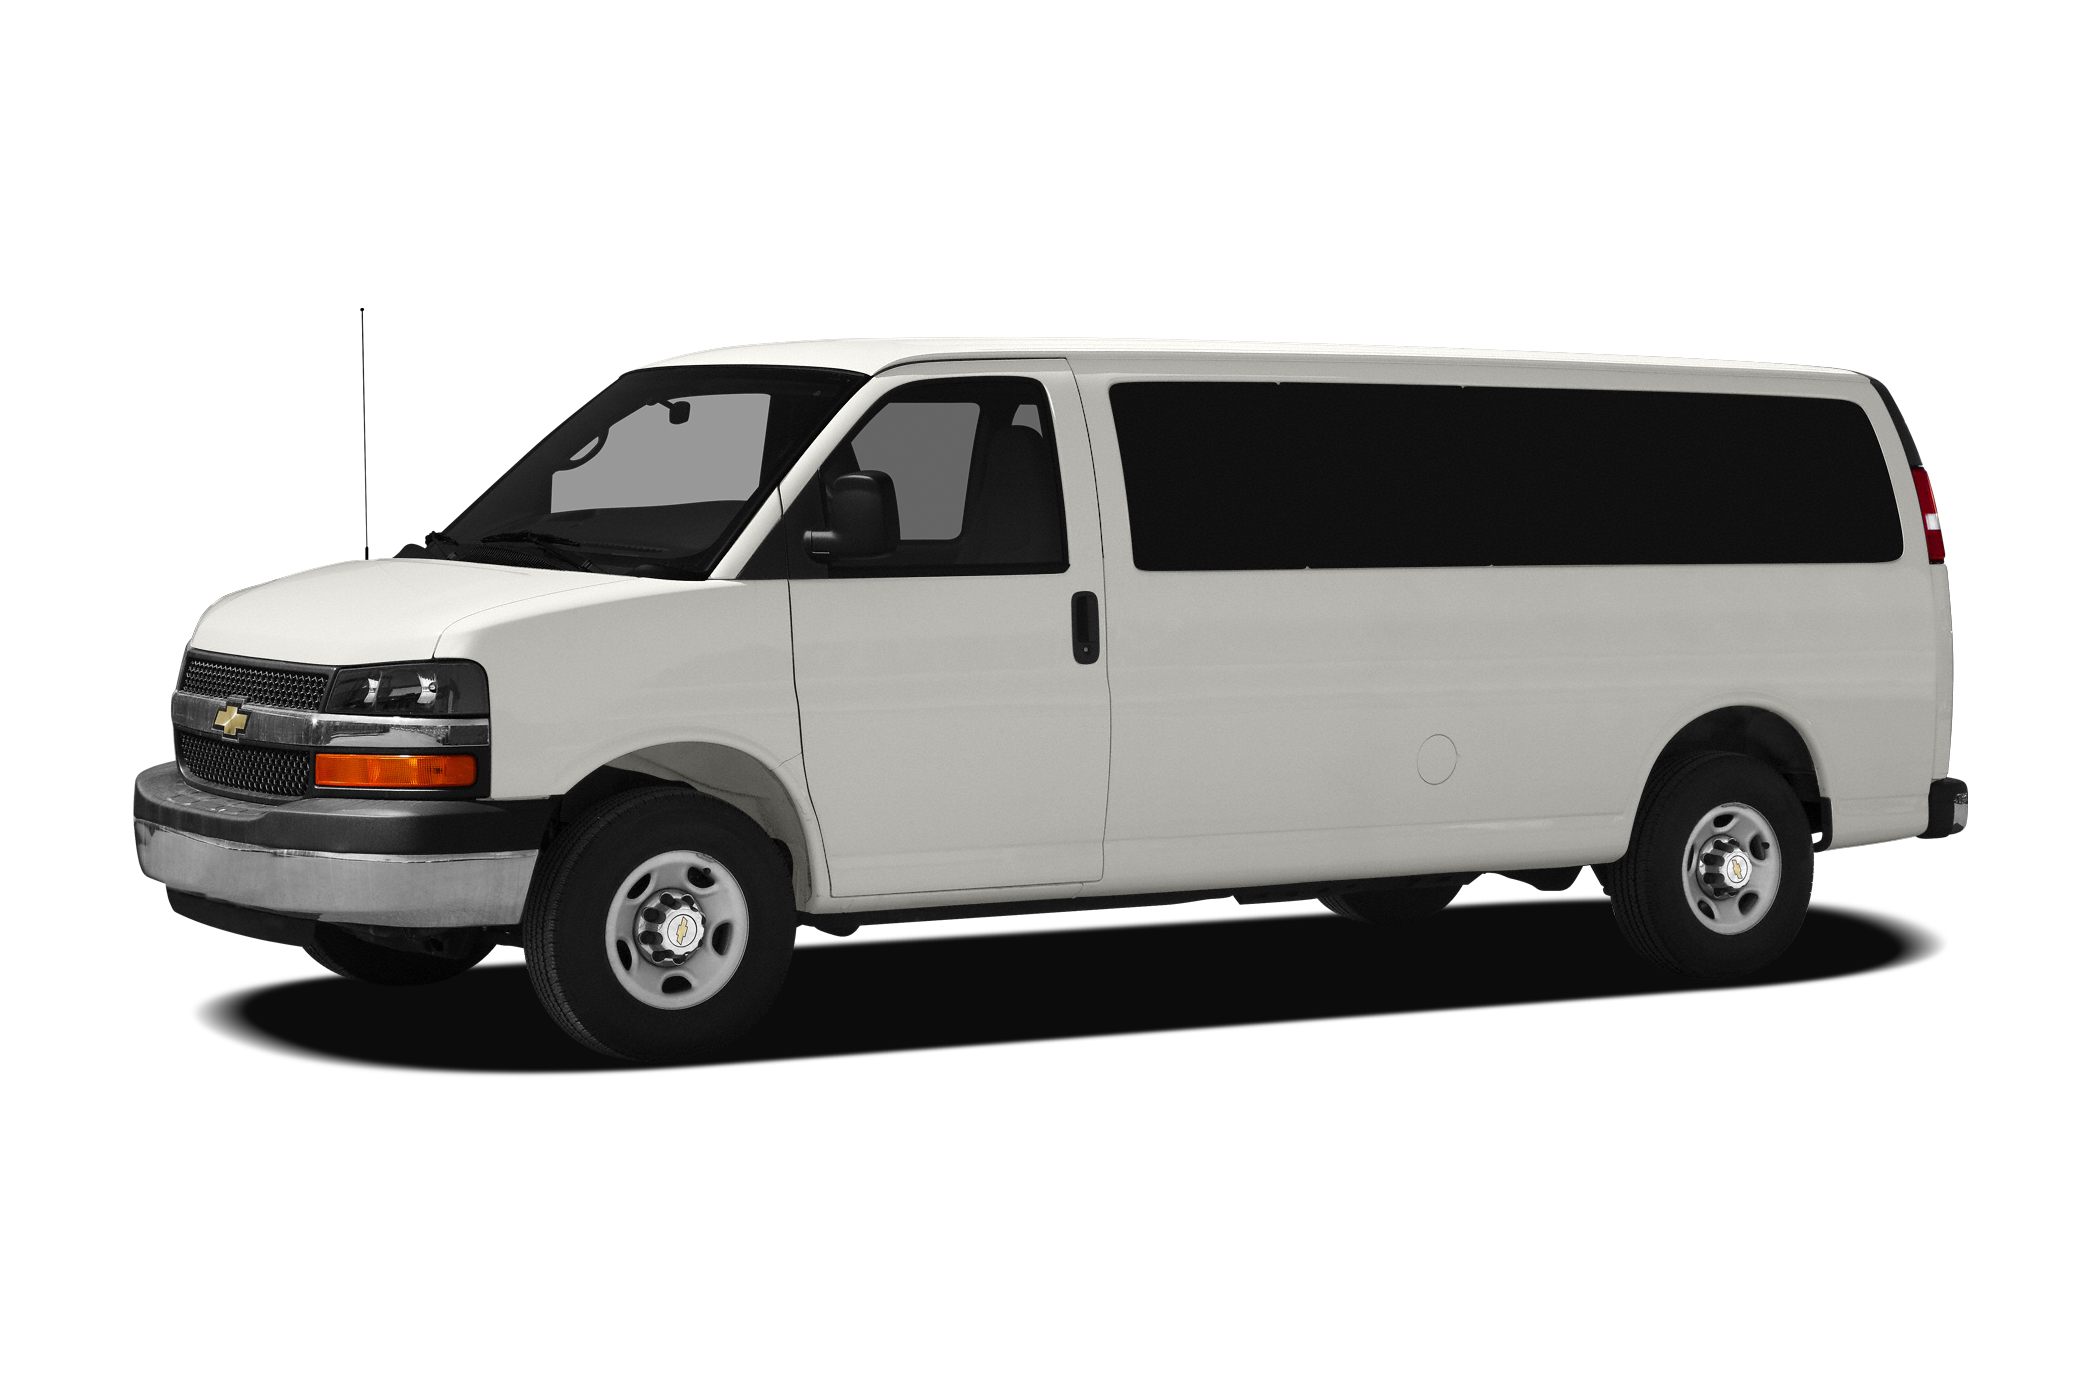 2011 Chevrolet Express 3500 Specs and 